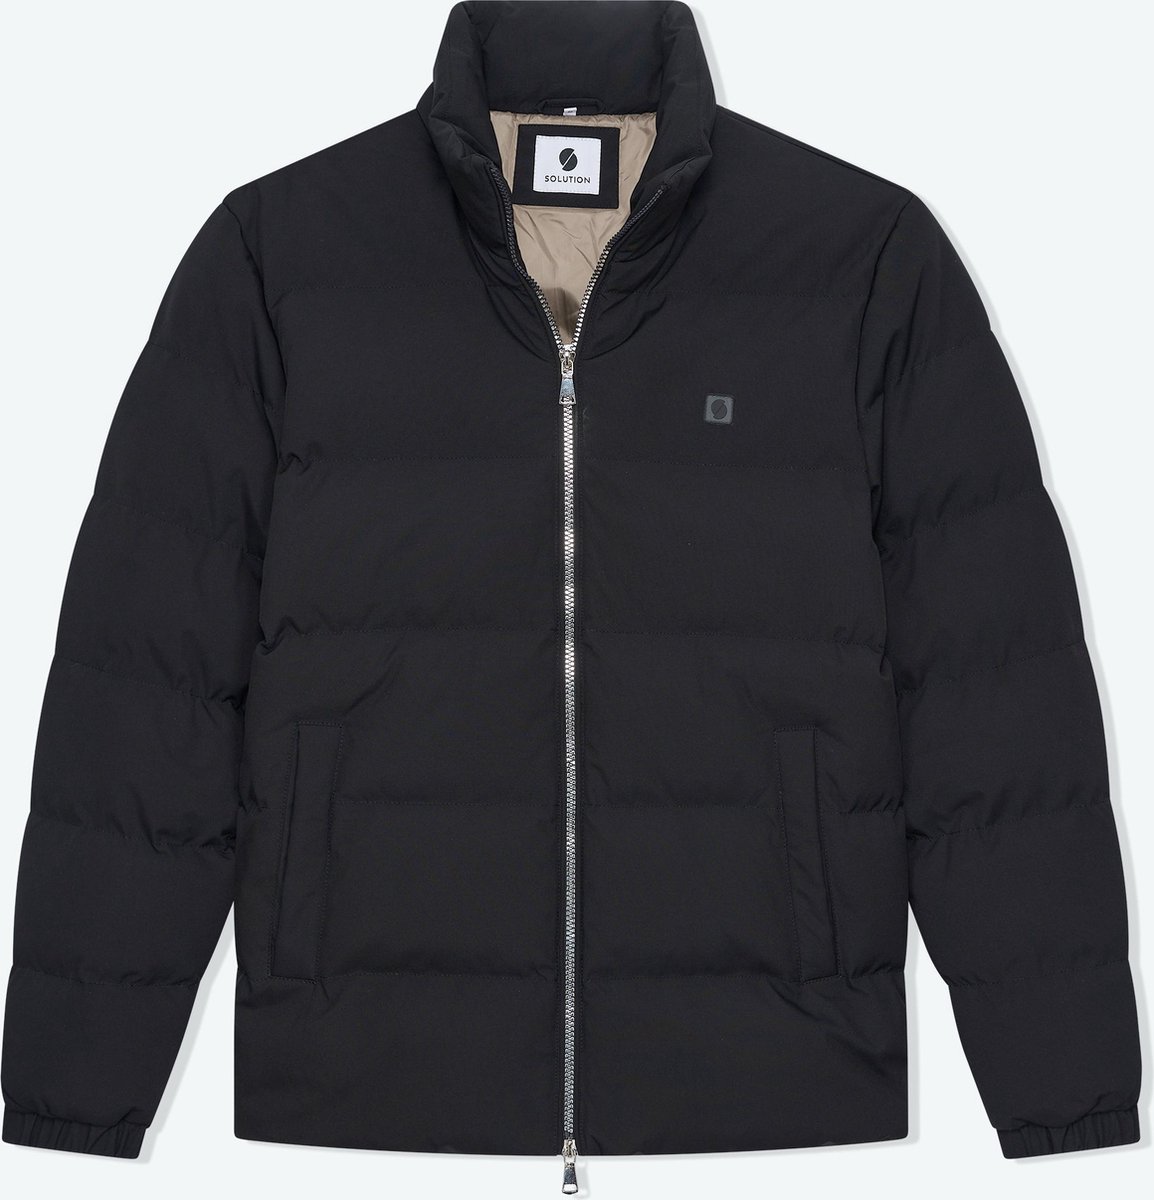 Puffer jacket Jacky Black - L - Solution Clothing